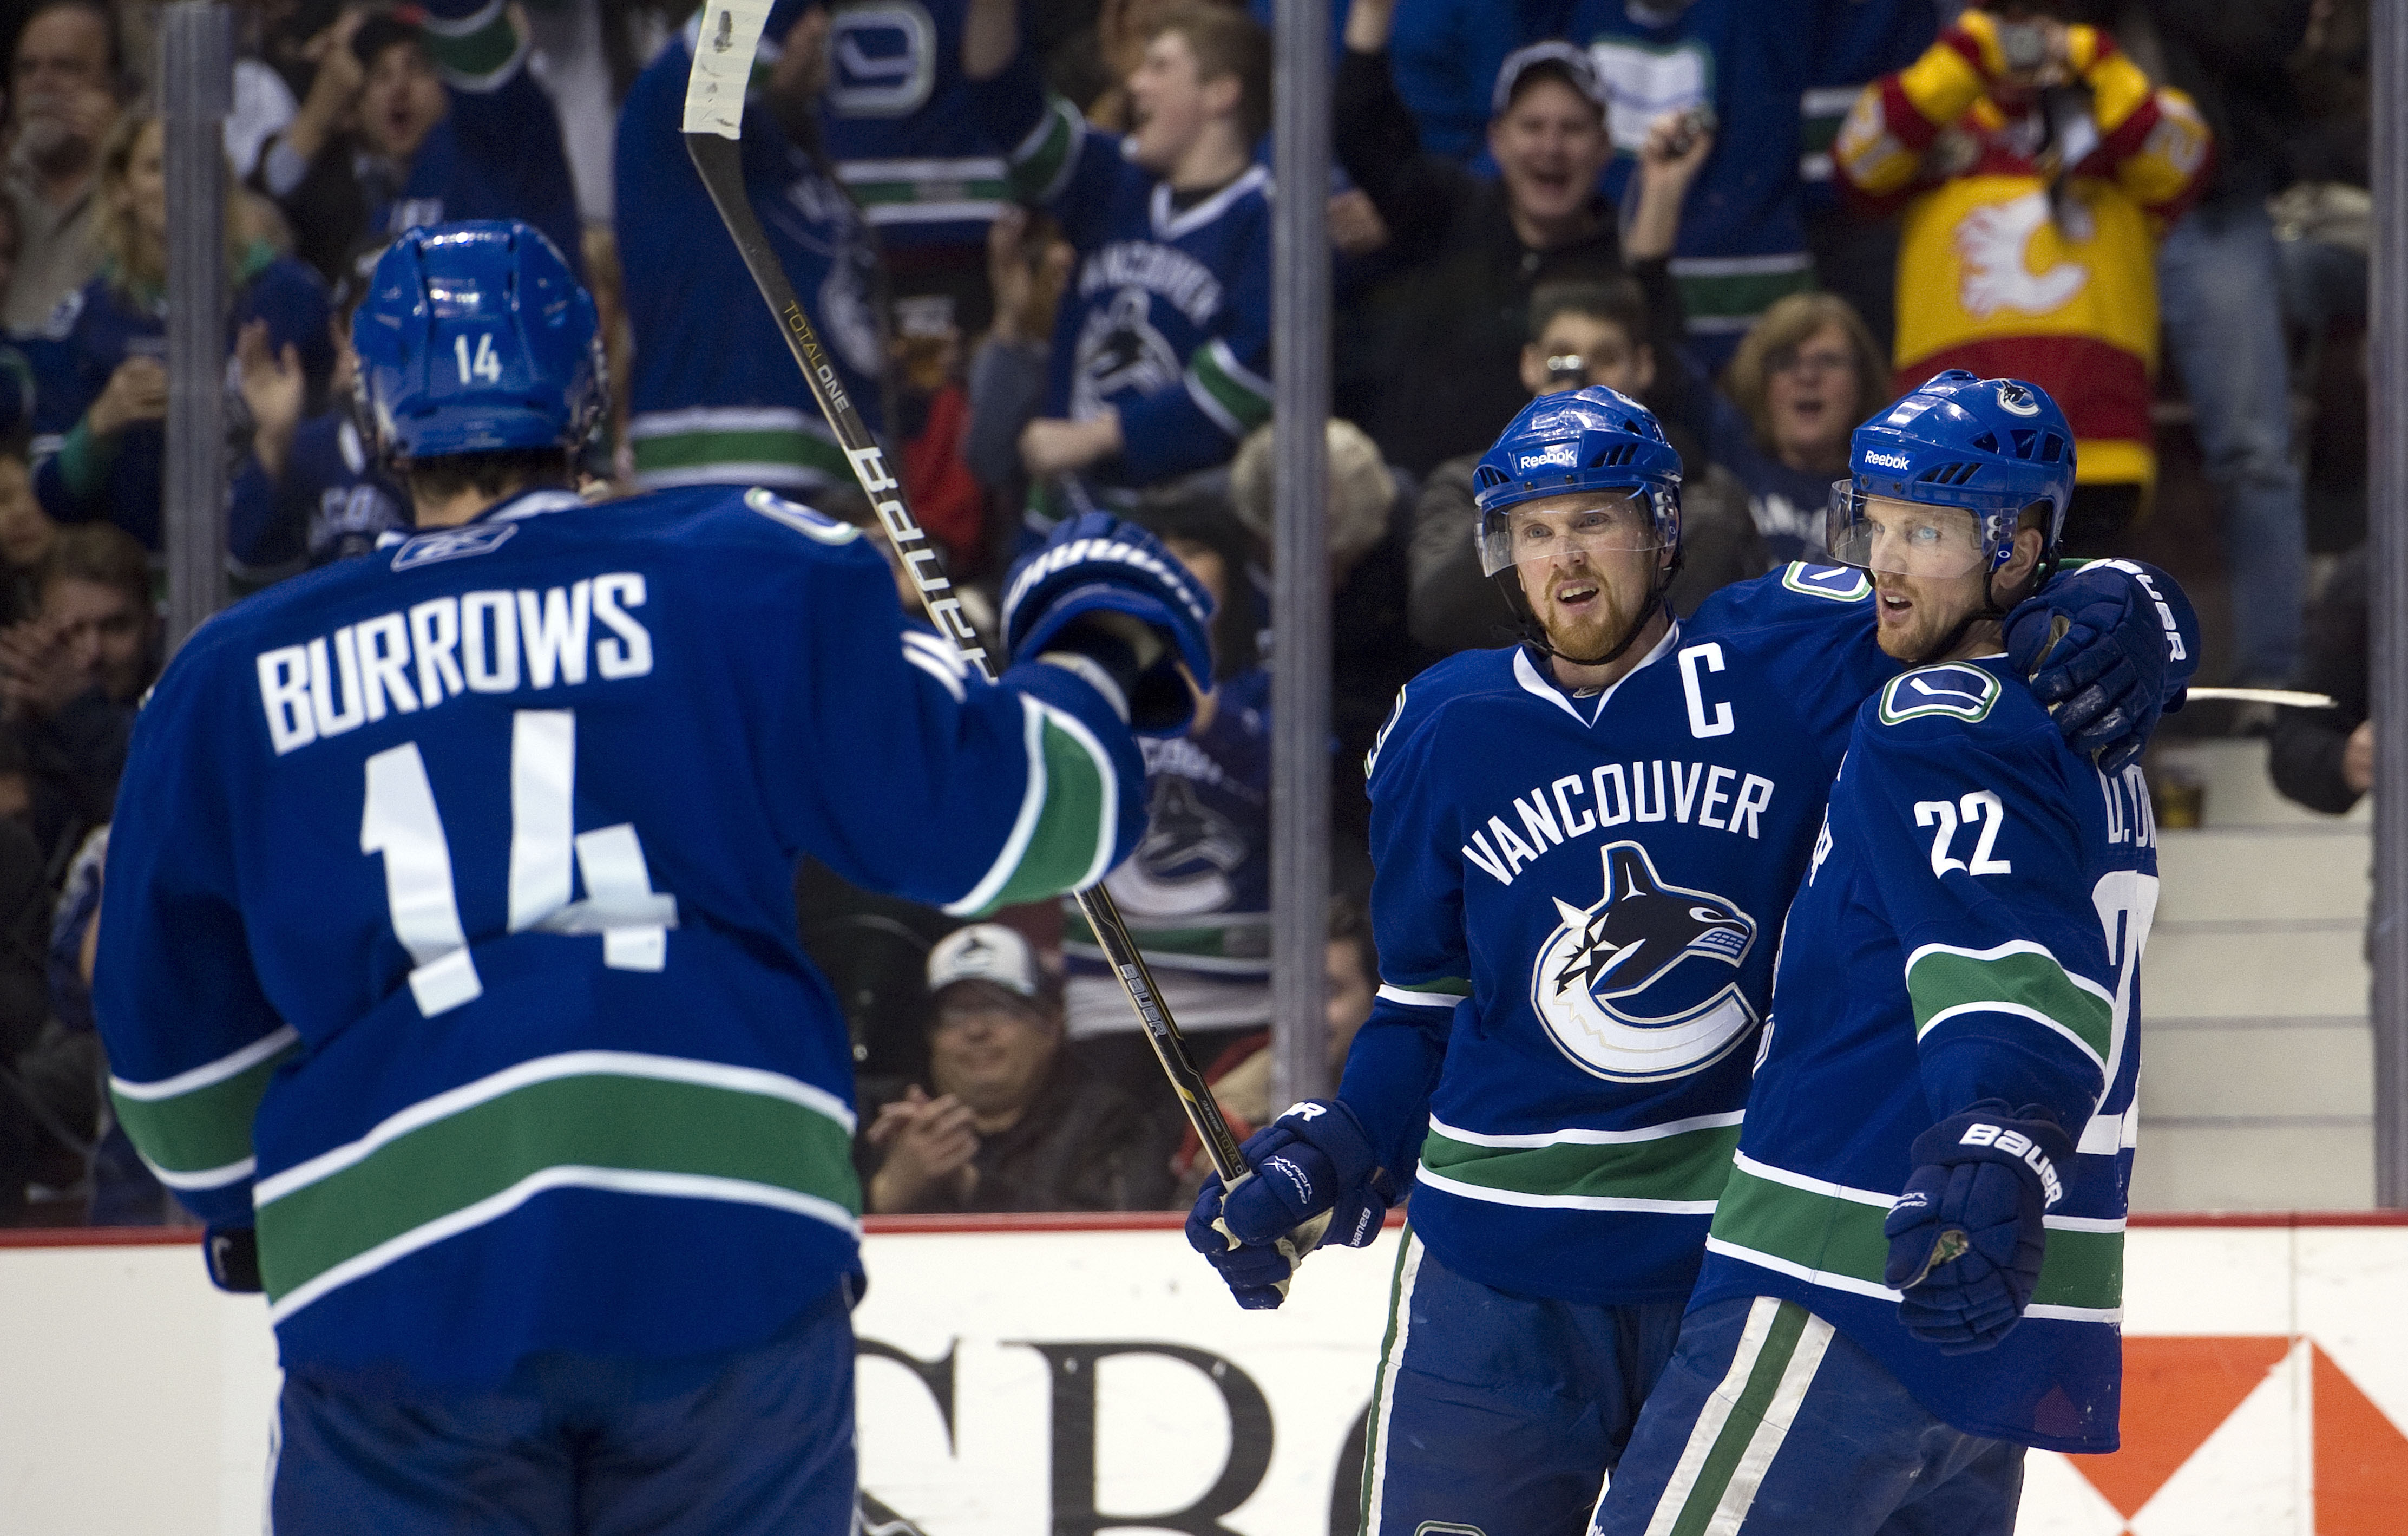 VANCOUVER, CANADA - JANUARY 5: Daniel Sedin #22 of the Vancouver Canucks celebrates with brother Henrik Sedin #33 and Alexandre Burrows #14 after scoring against the Calgary Flames during the second period in NHL action on January 05, 2011 at Rogers Arena